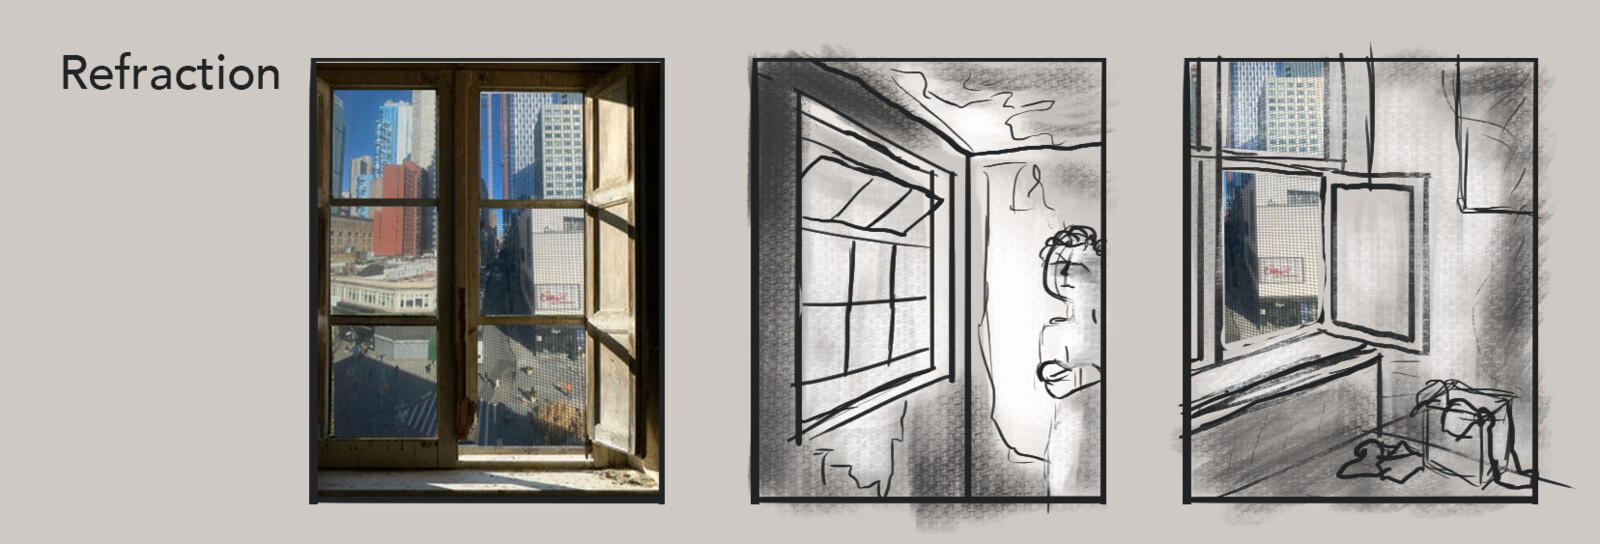 Thumbnails featuring the view from the author's own window.